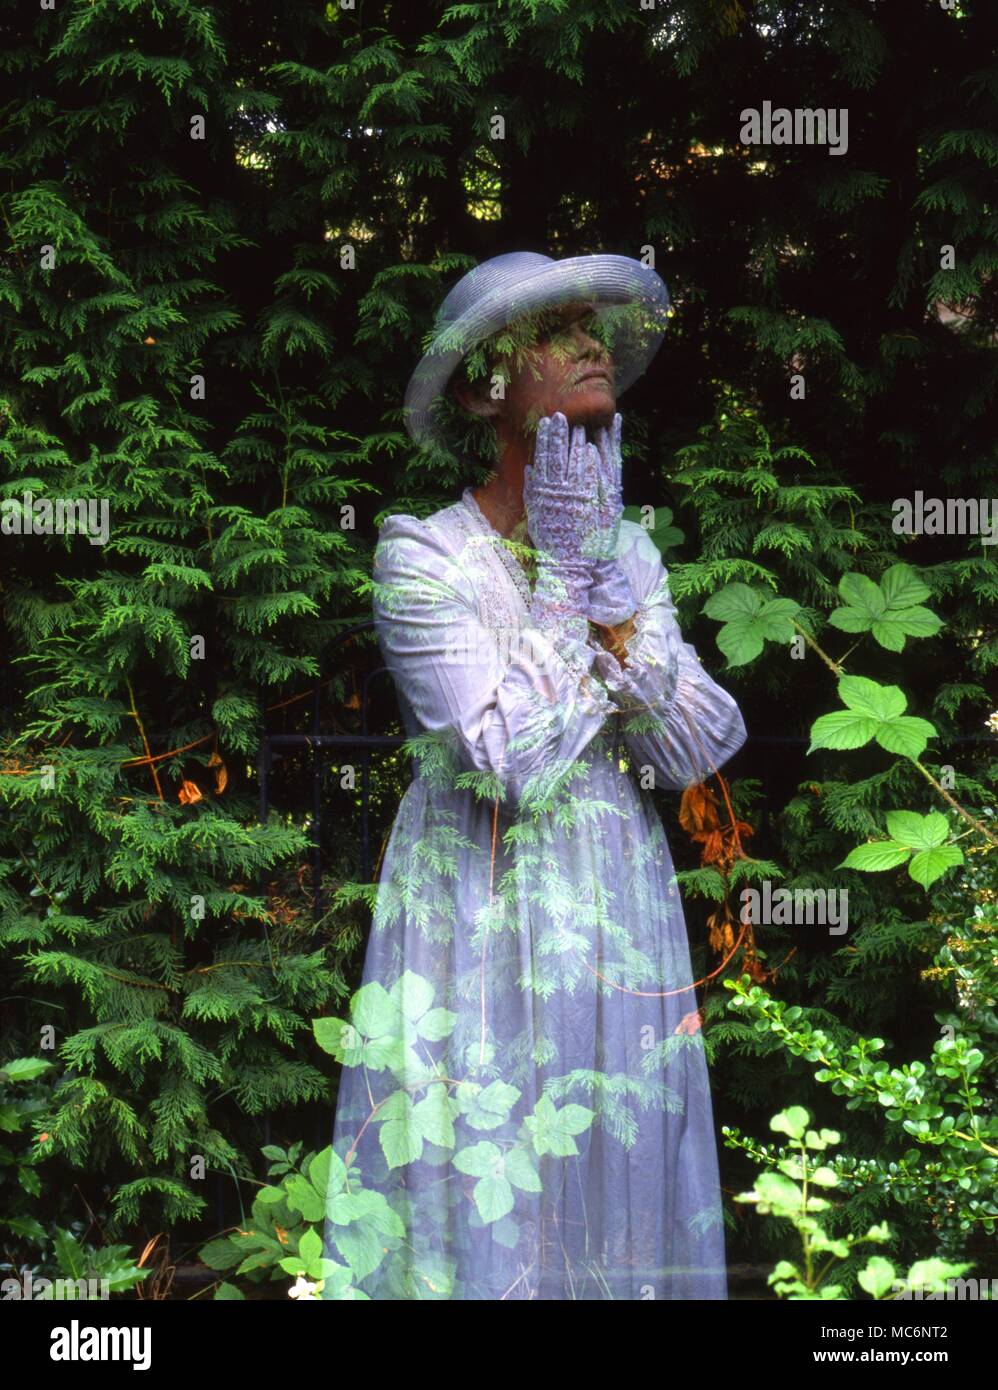 GHOSTS - HAUNTINGS - GHOST OF WOMAN IN GARDEN Stock Photo